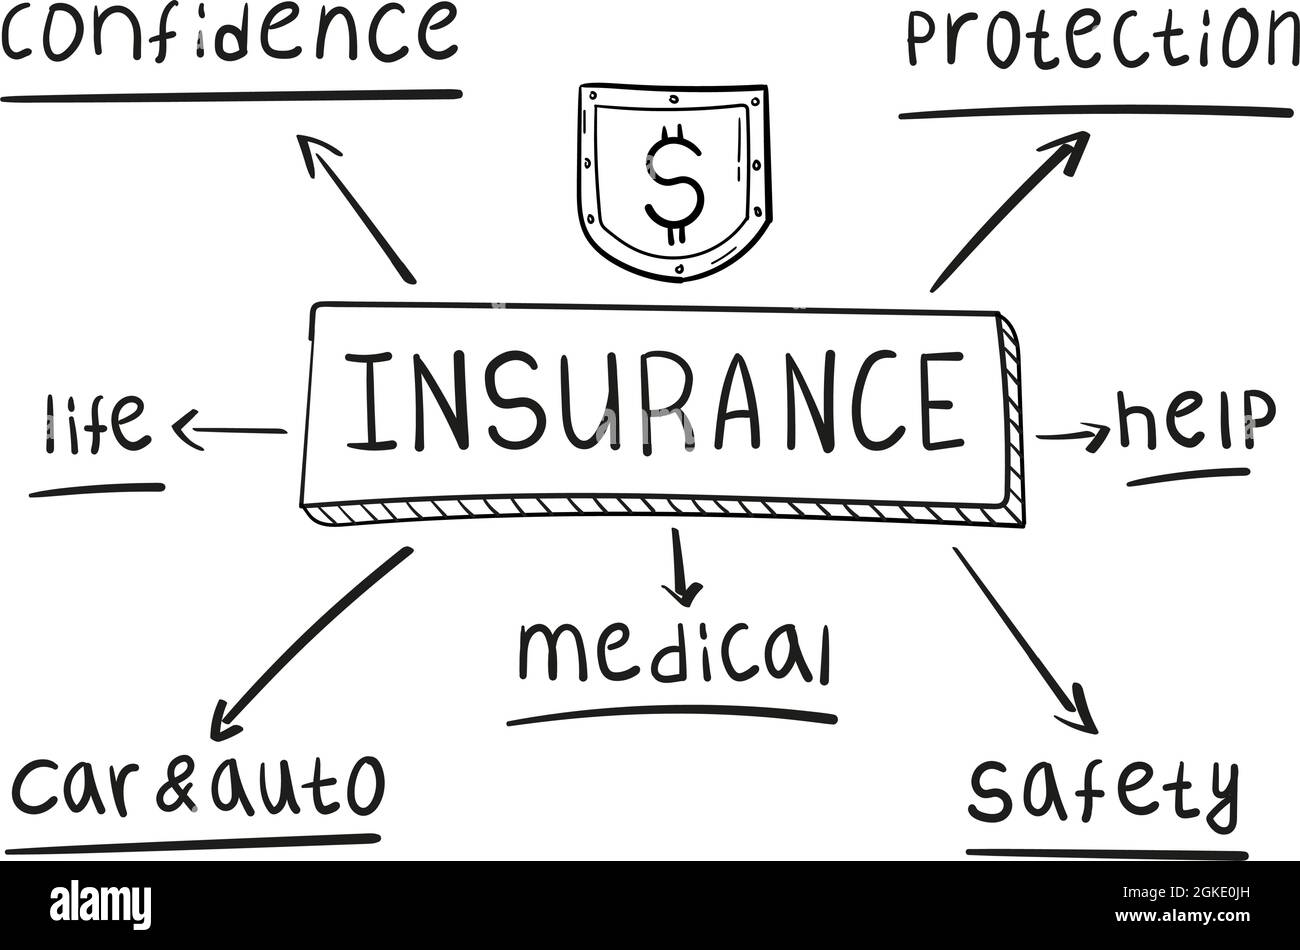 Concept of insurance mind map in handwritten style. Stock Vector